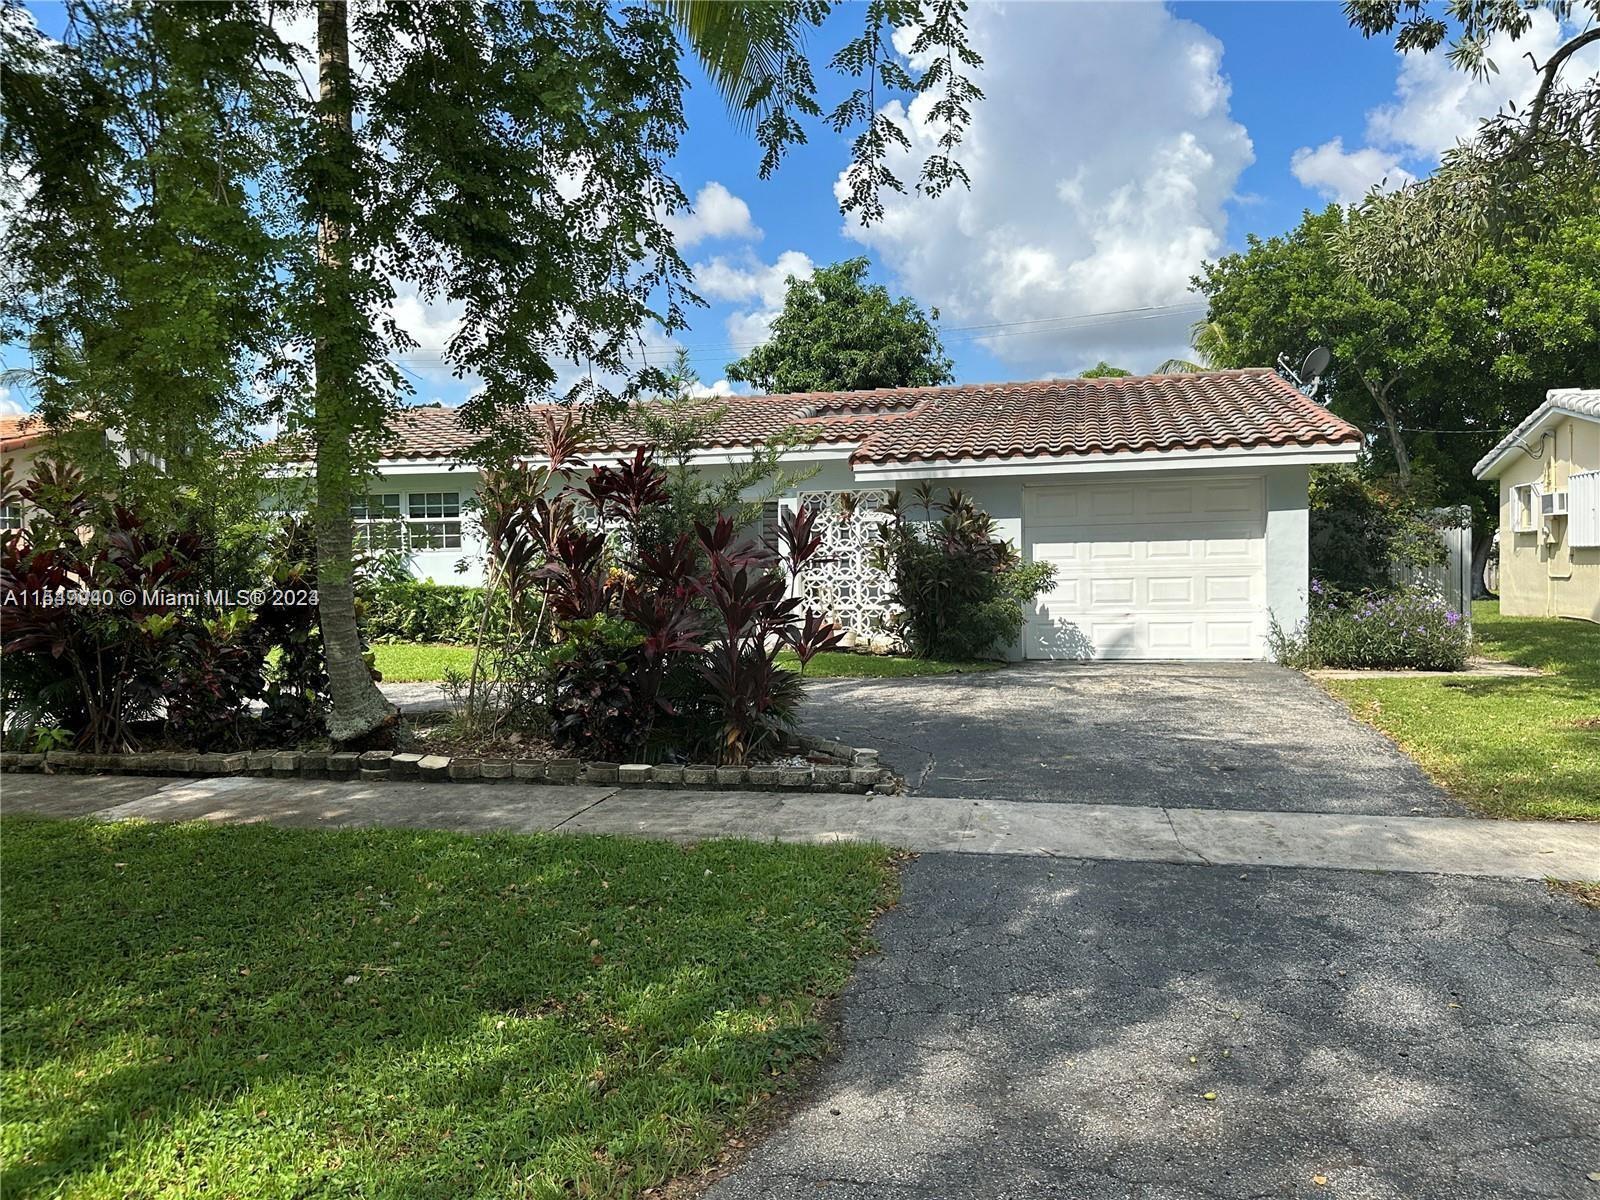 Photo of 1918 N 45th Ave in Hollywood, FL